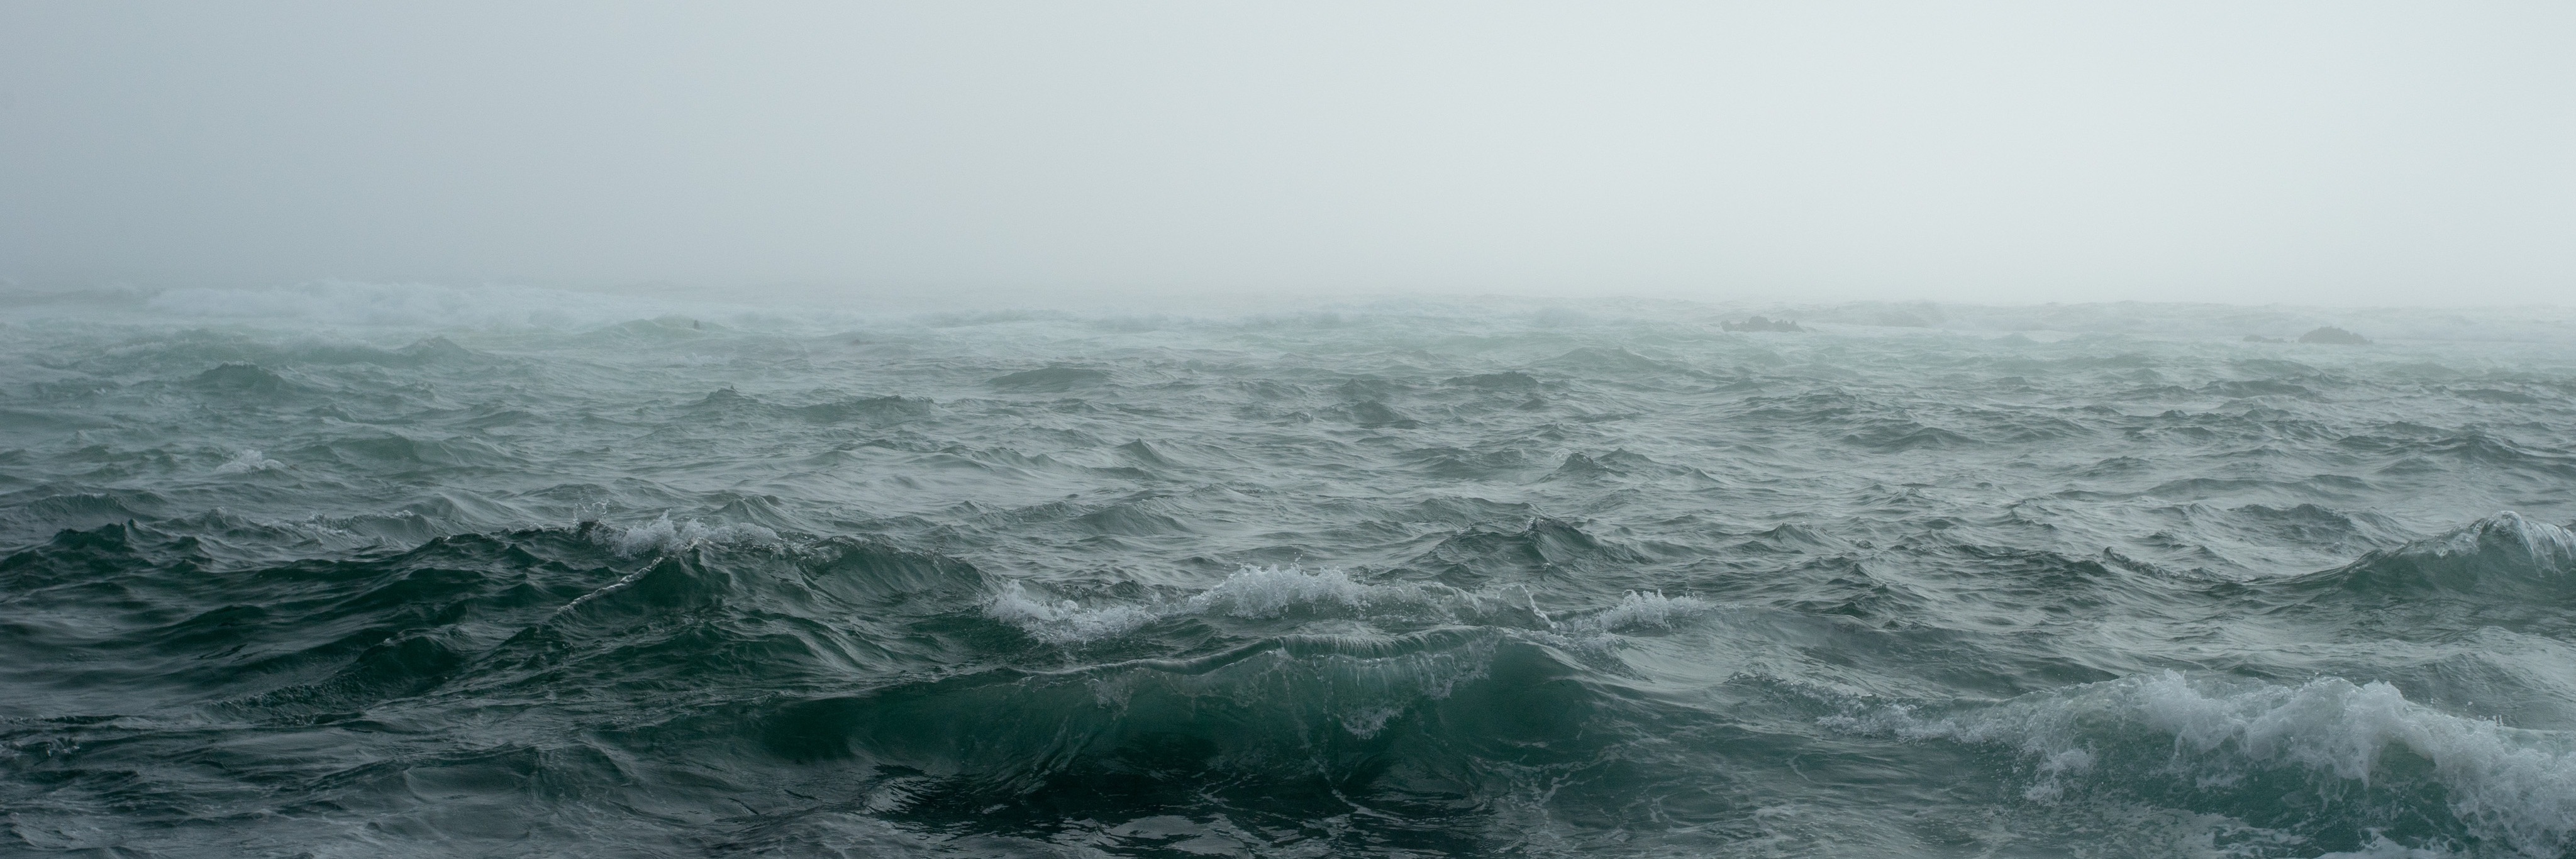 misty ocean scene during storm with rough waves